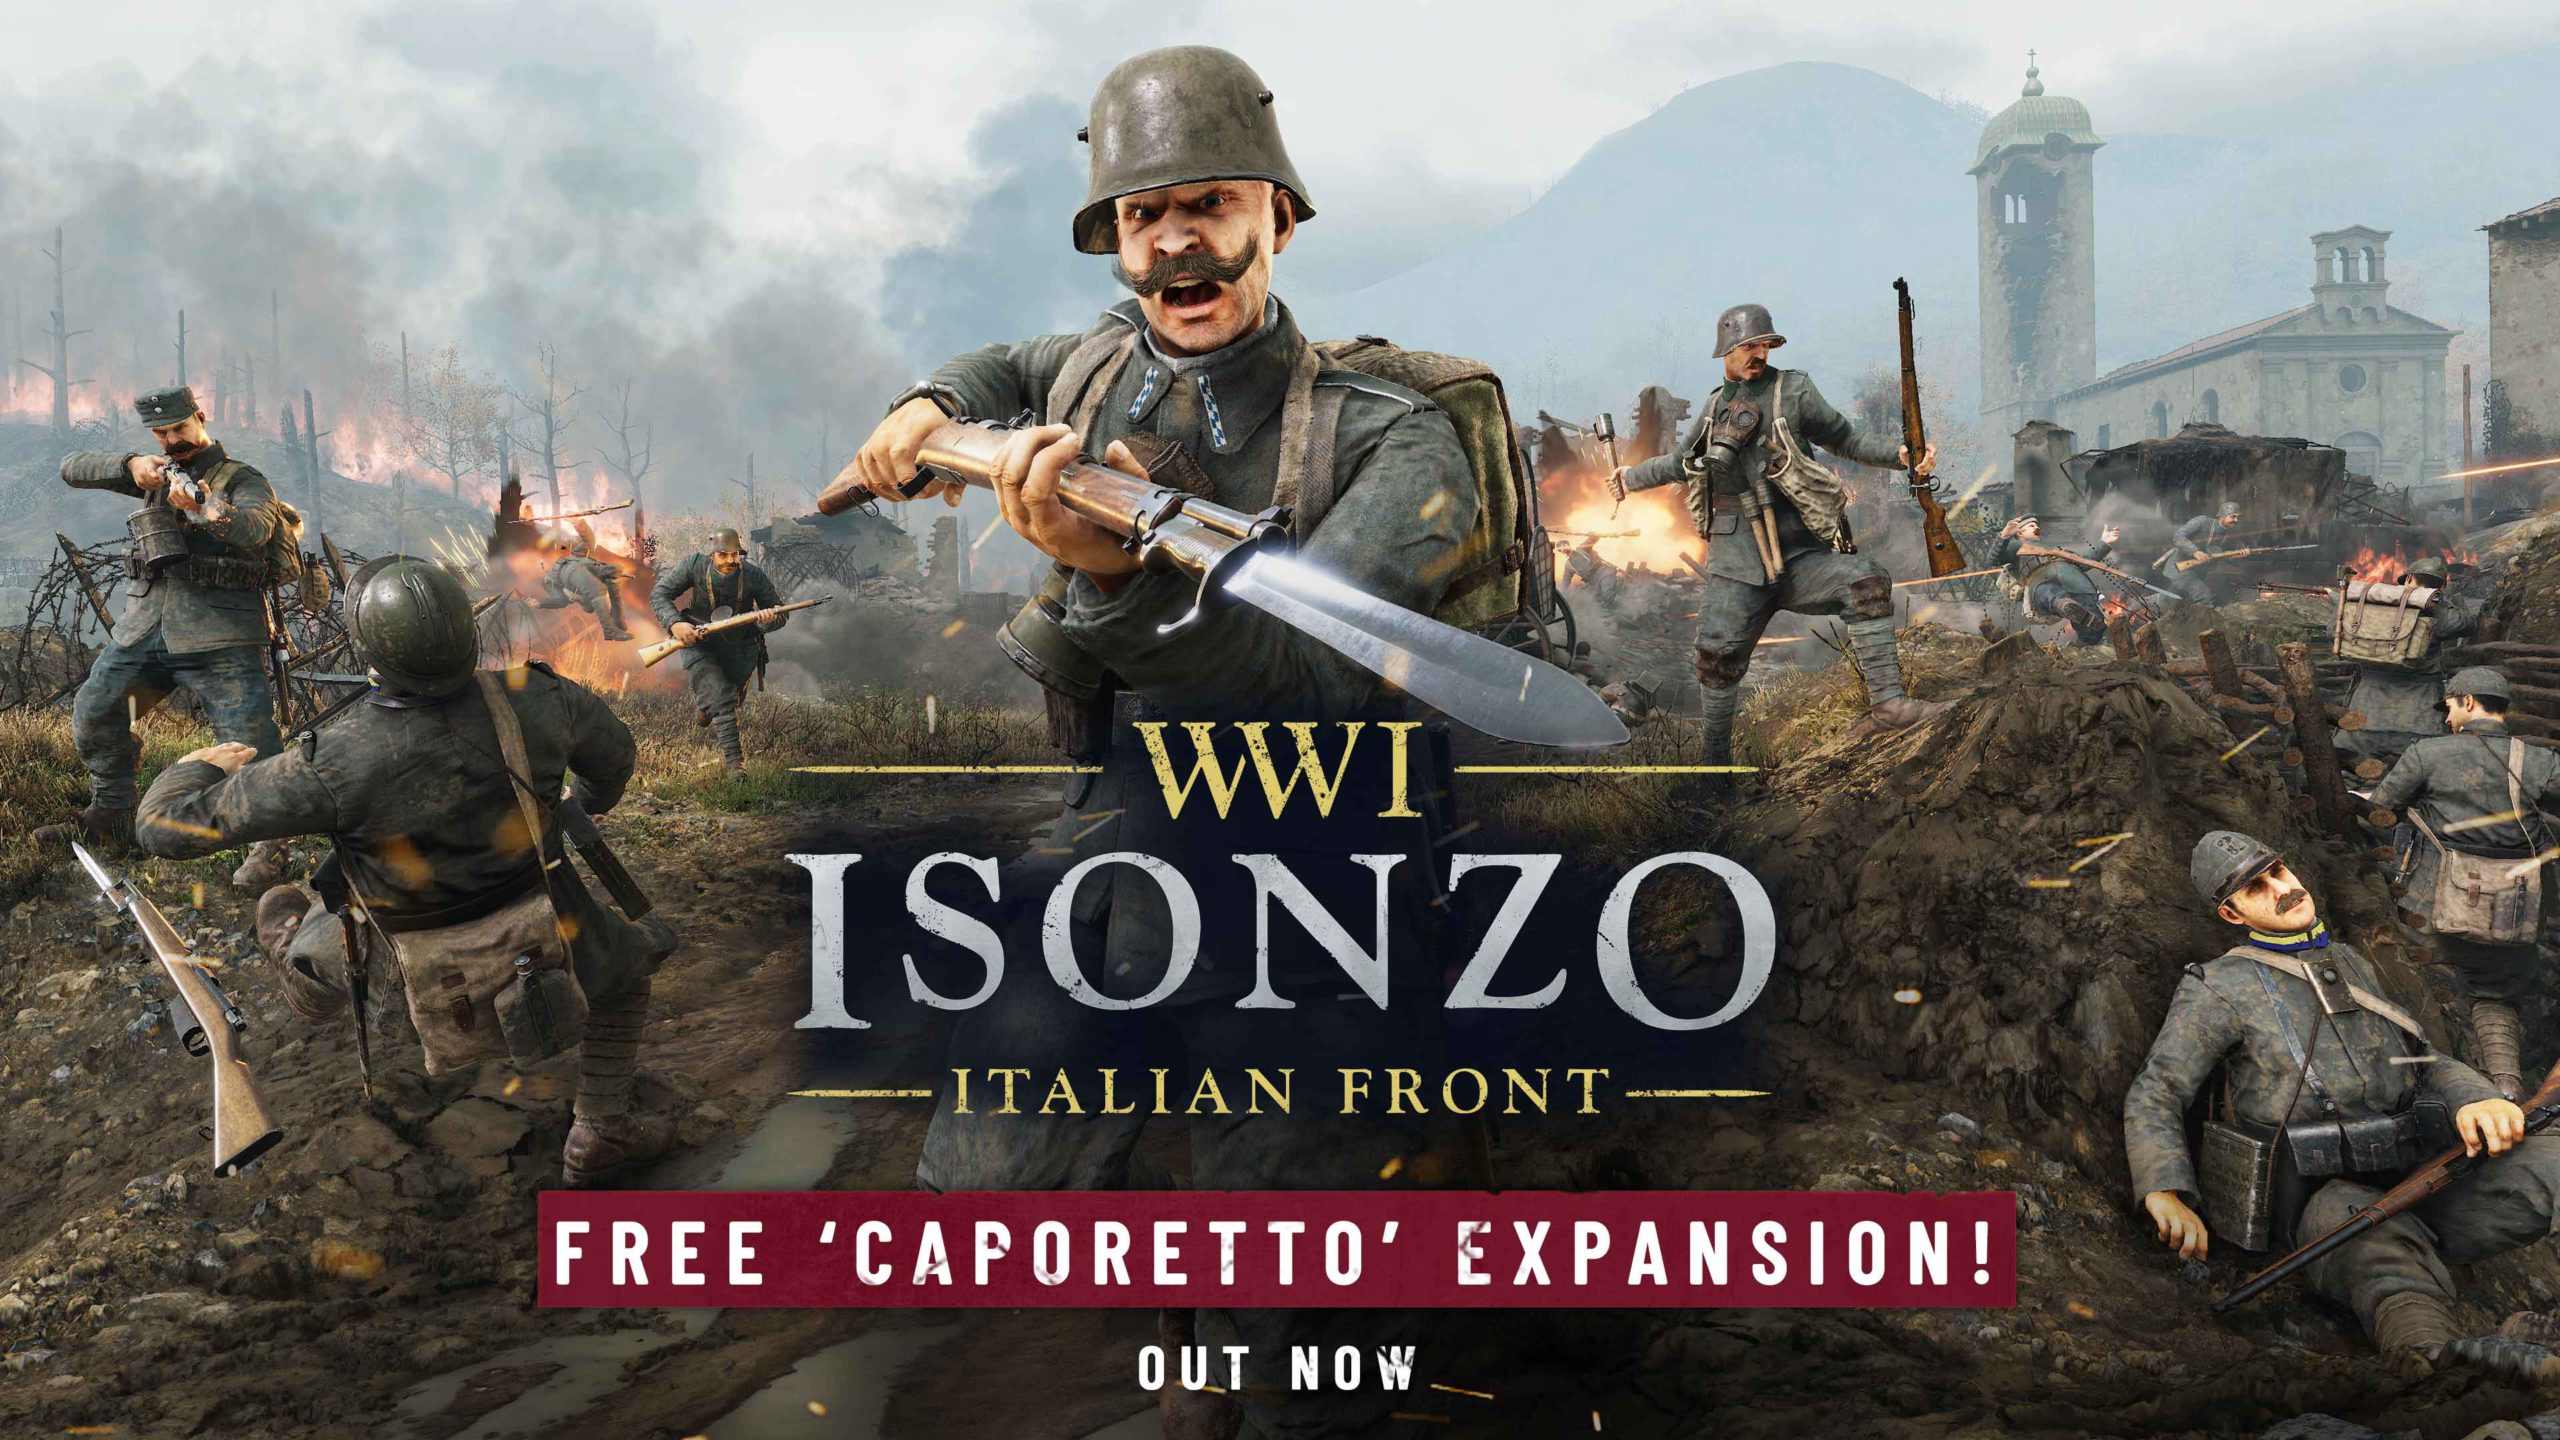 The German Empire Marches to Italy in a Free Expansion Today